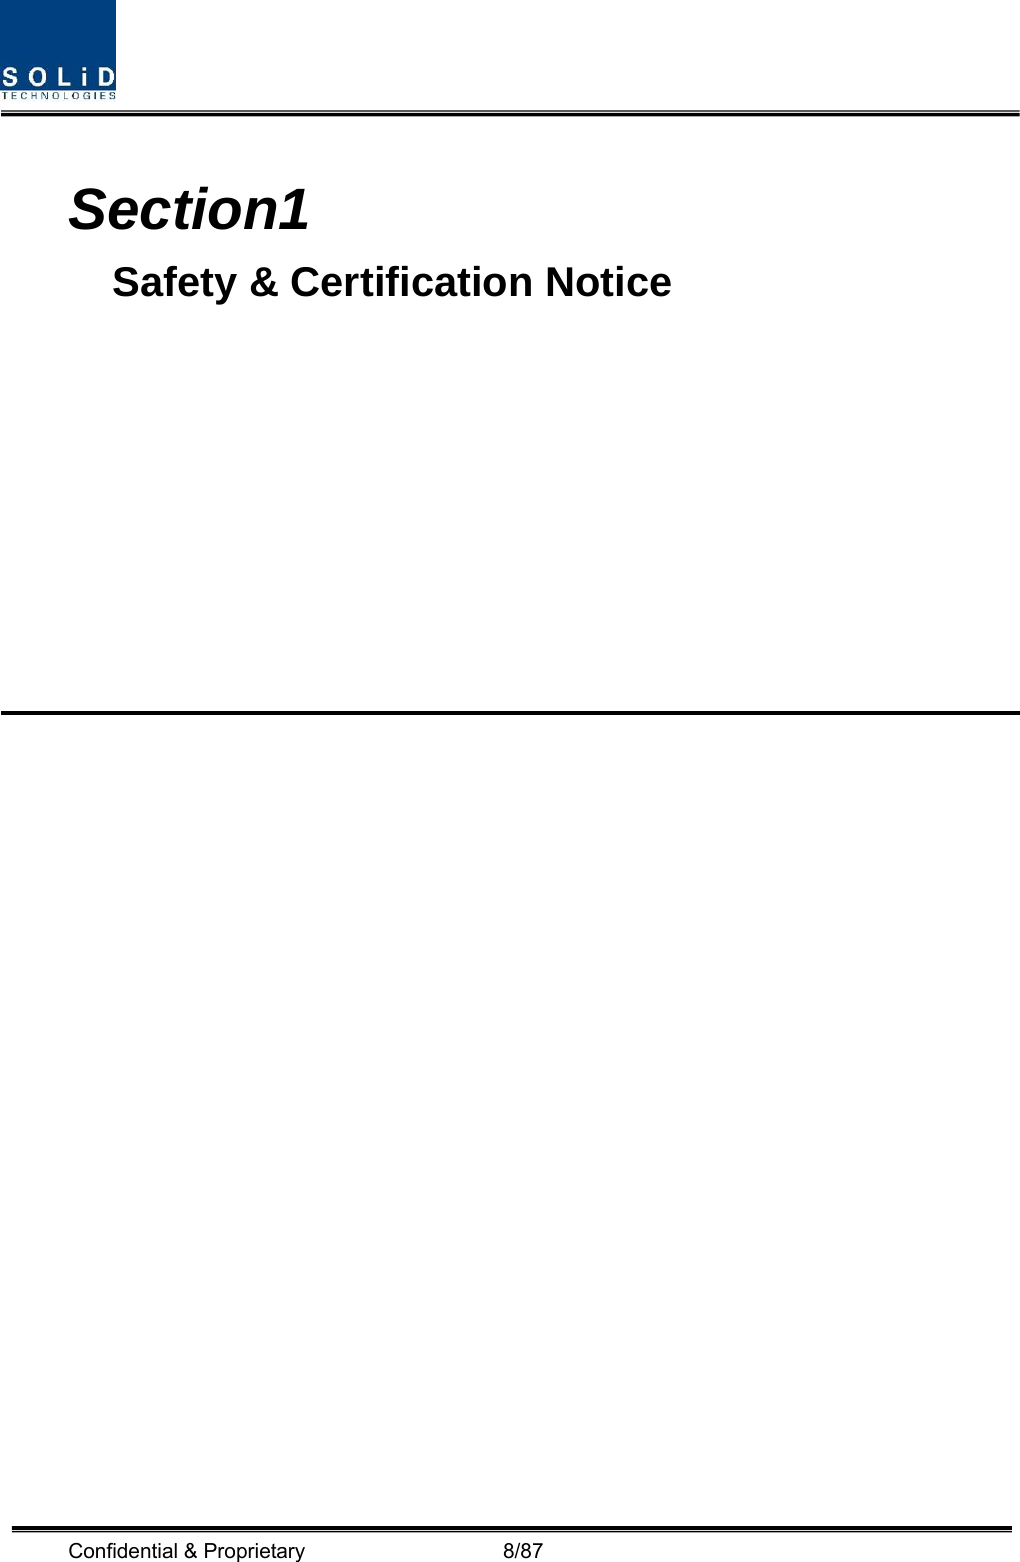  Confidential &amp; Proprietary                   8/87  Section1                                 Safety &amp; Certification Notice                                